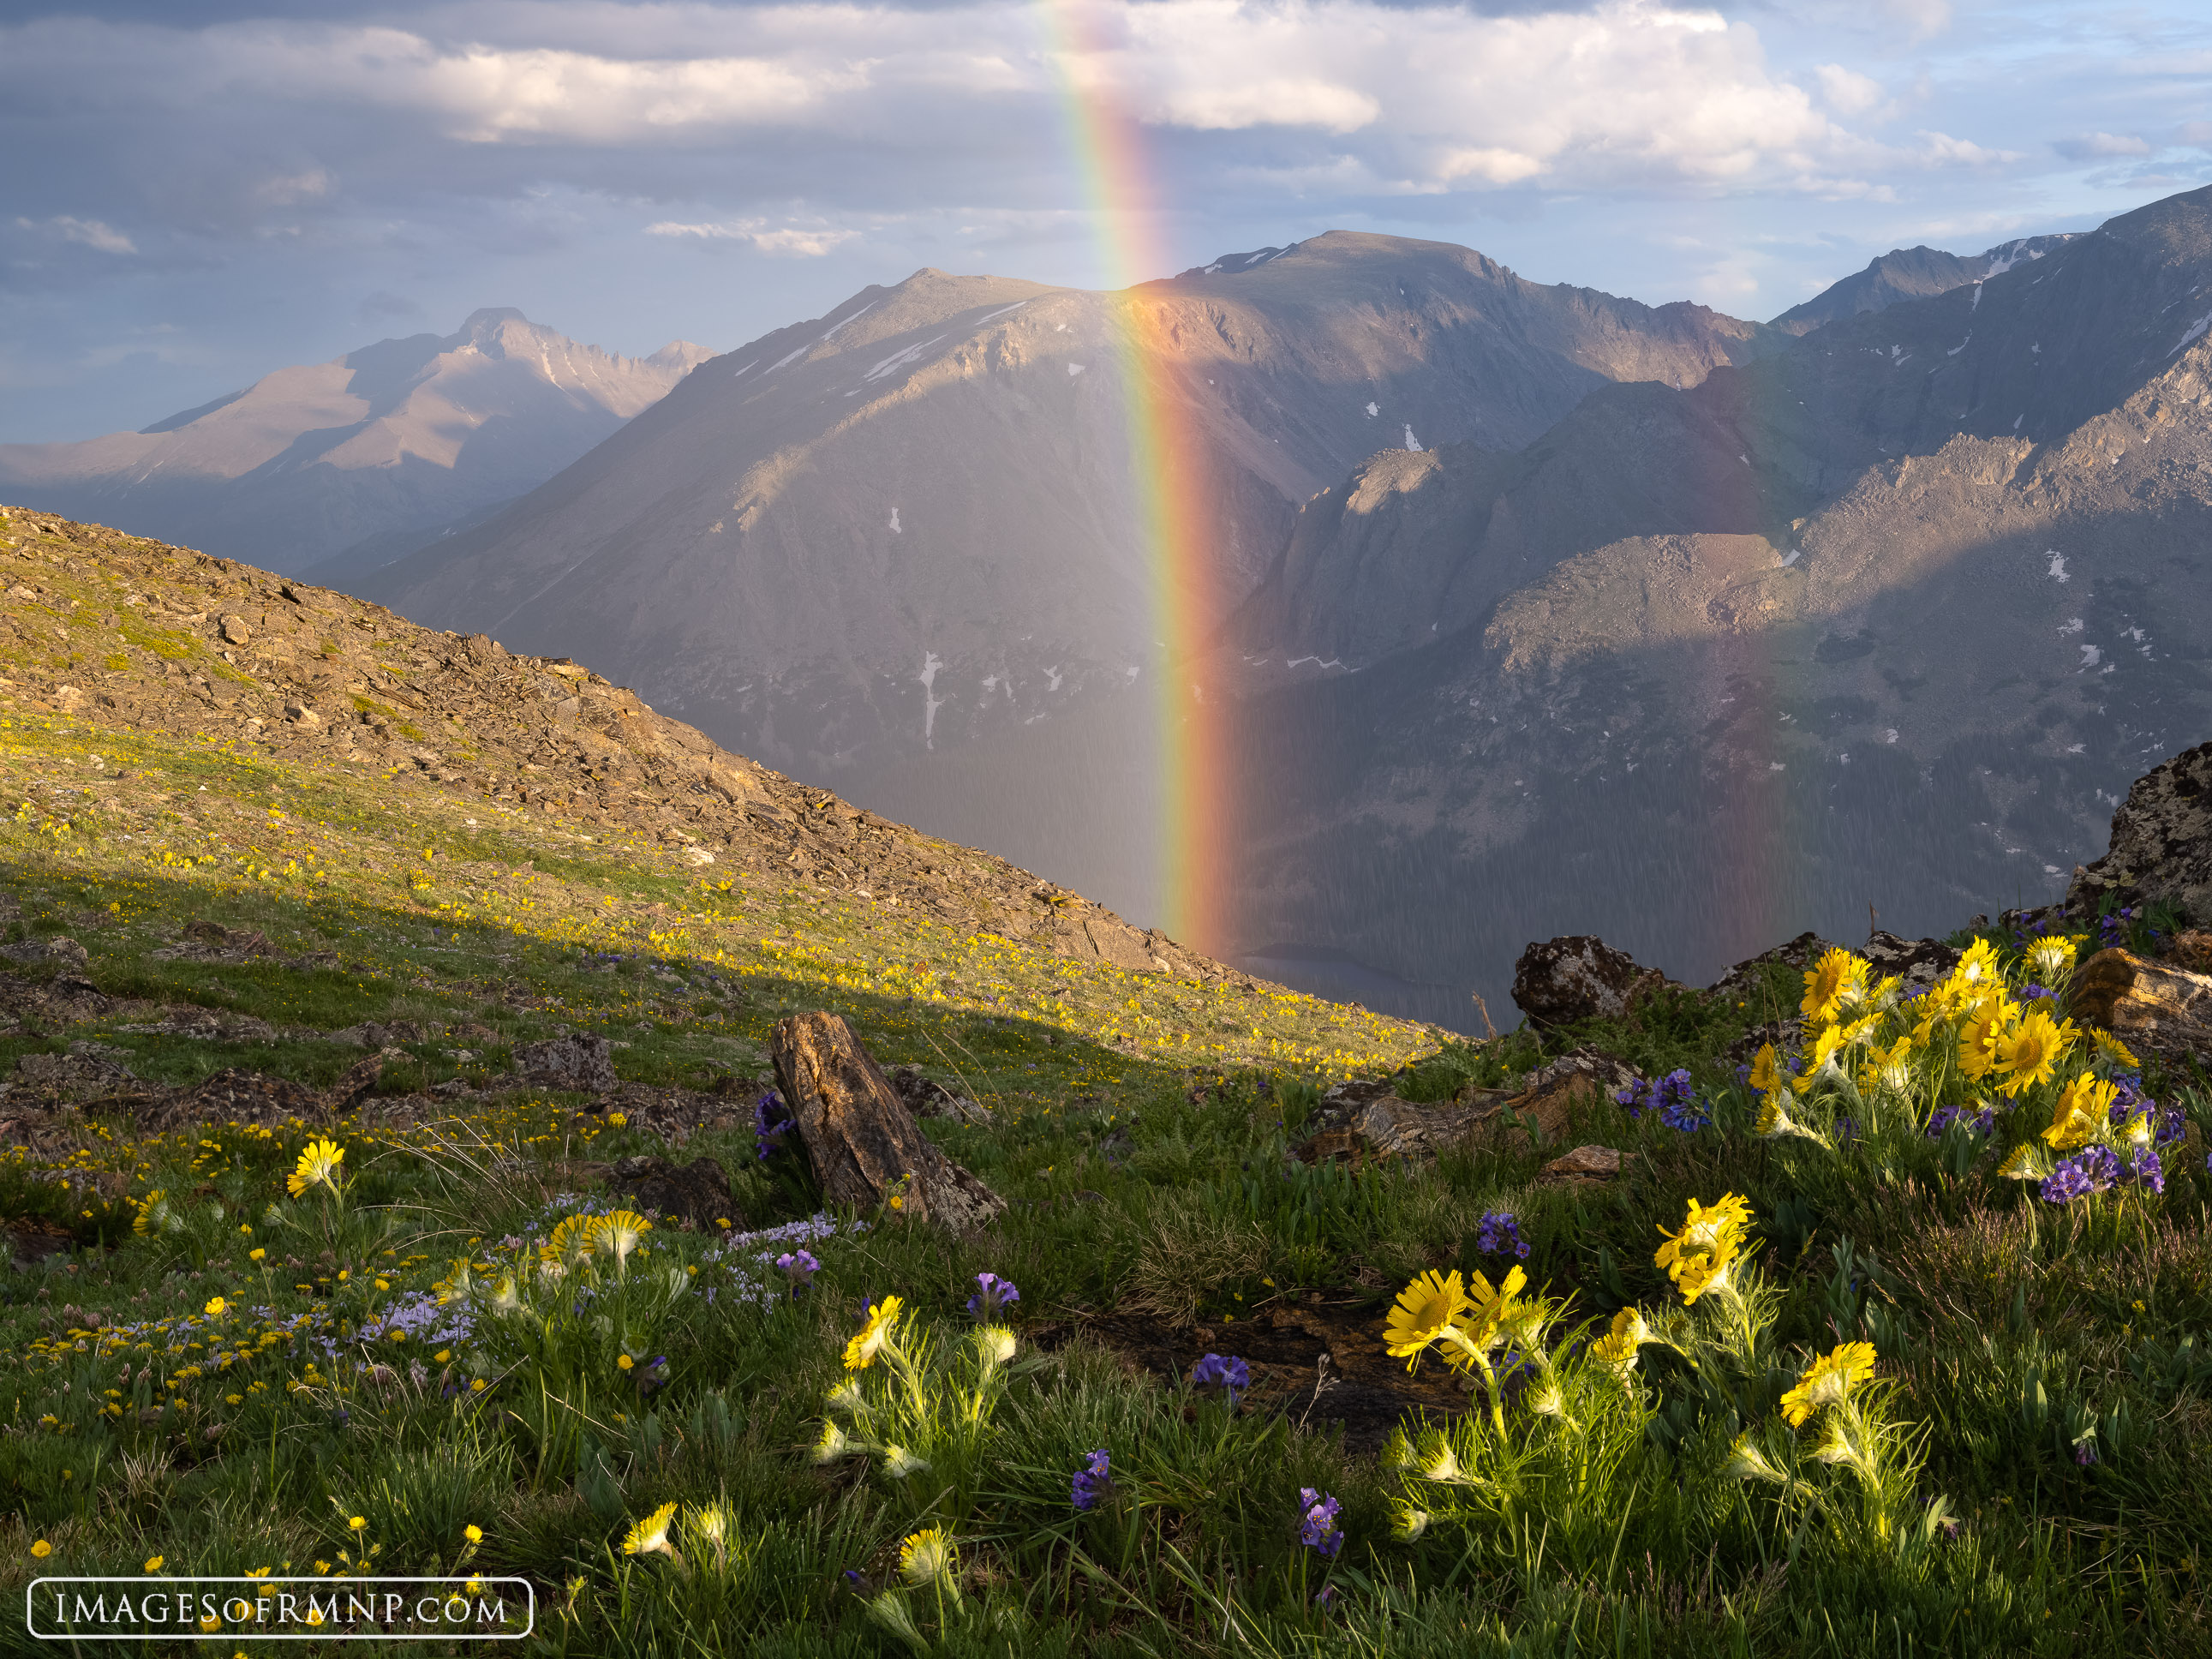 On a warm July evening, the alpine sunflowers watched as colorful rainbows appeared over Forest Canyon. In the distance, Longs...